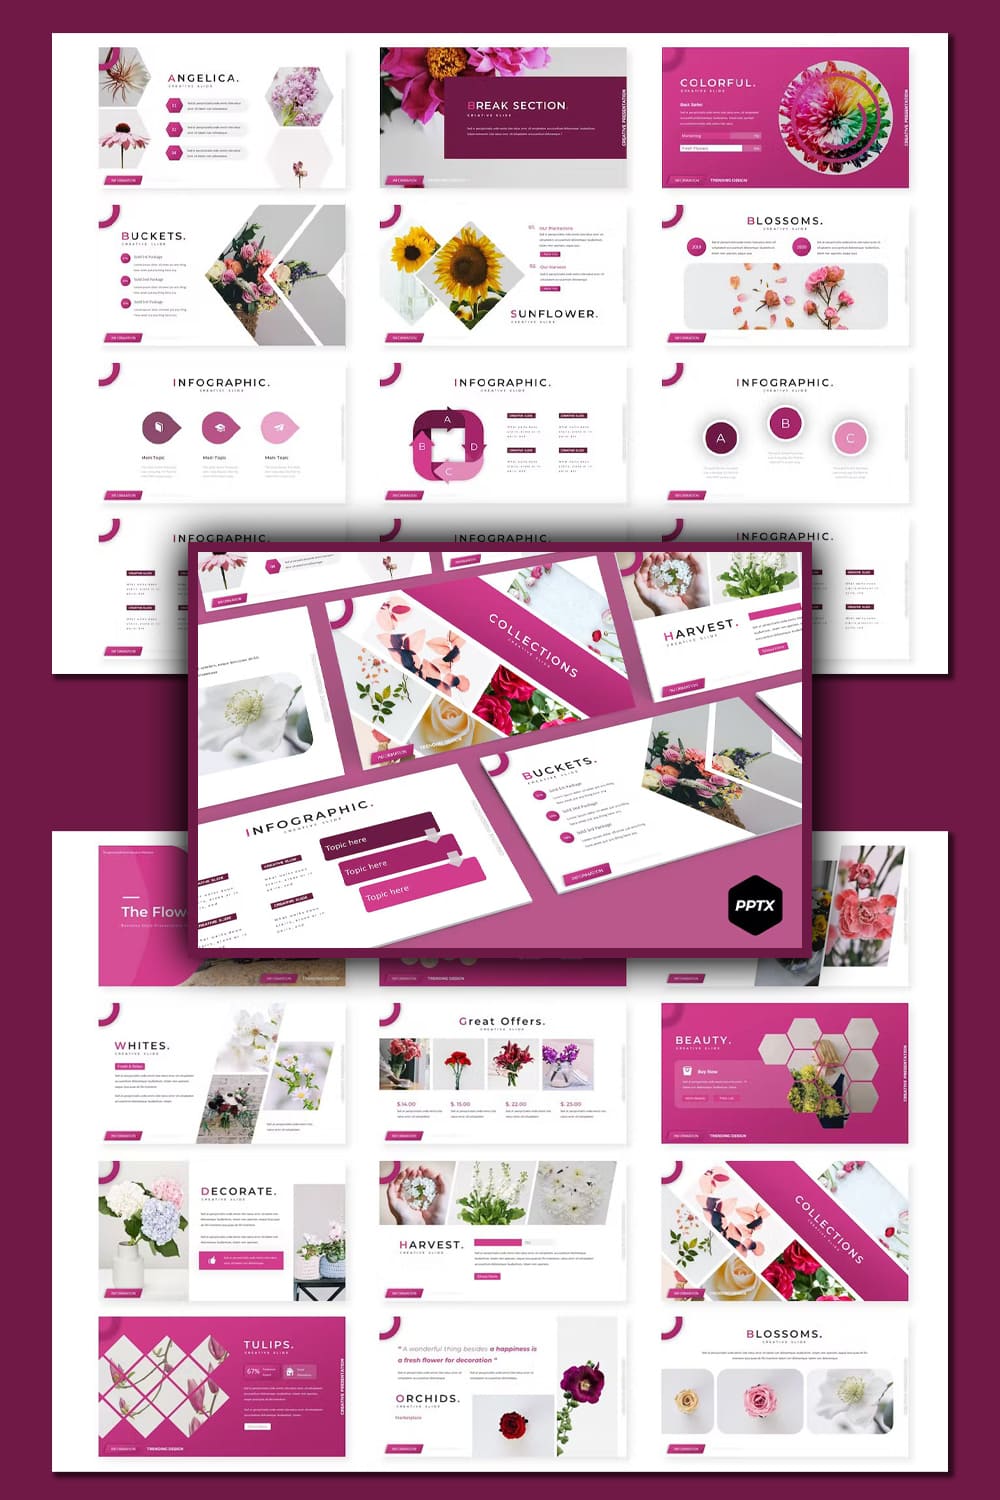 Pack of images of colorful presentation template slides in pink and white colors.